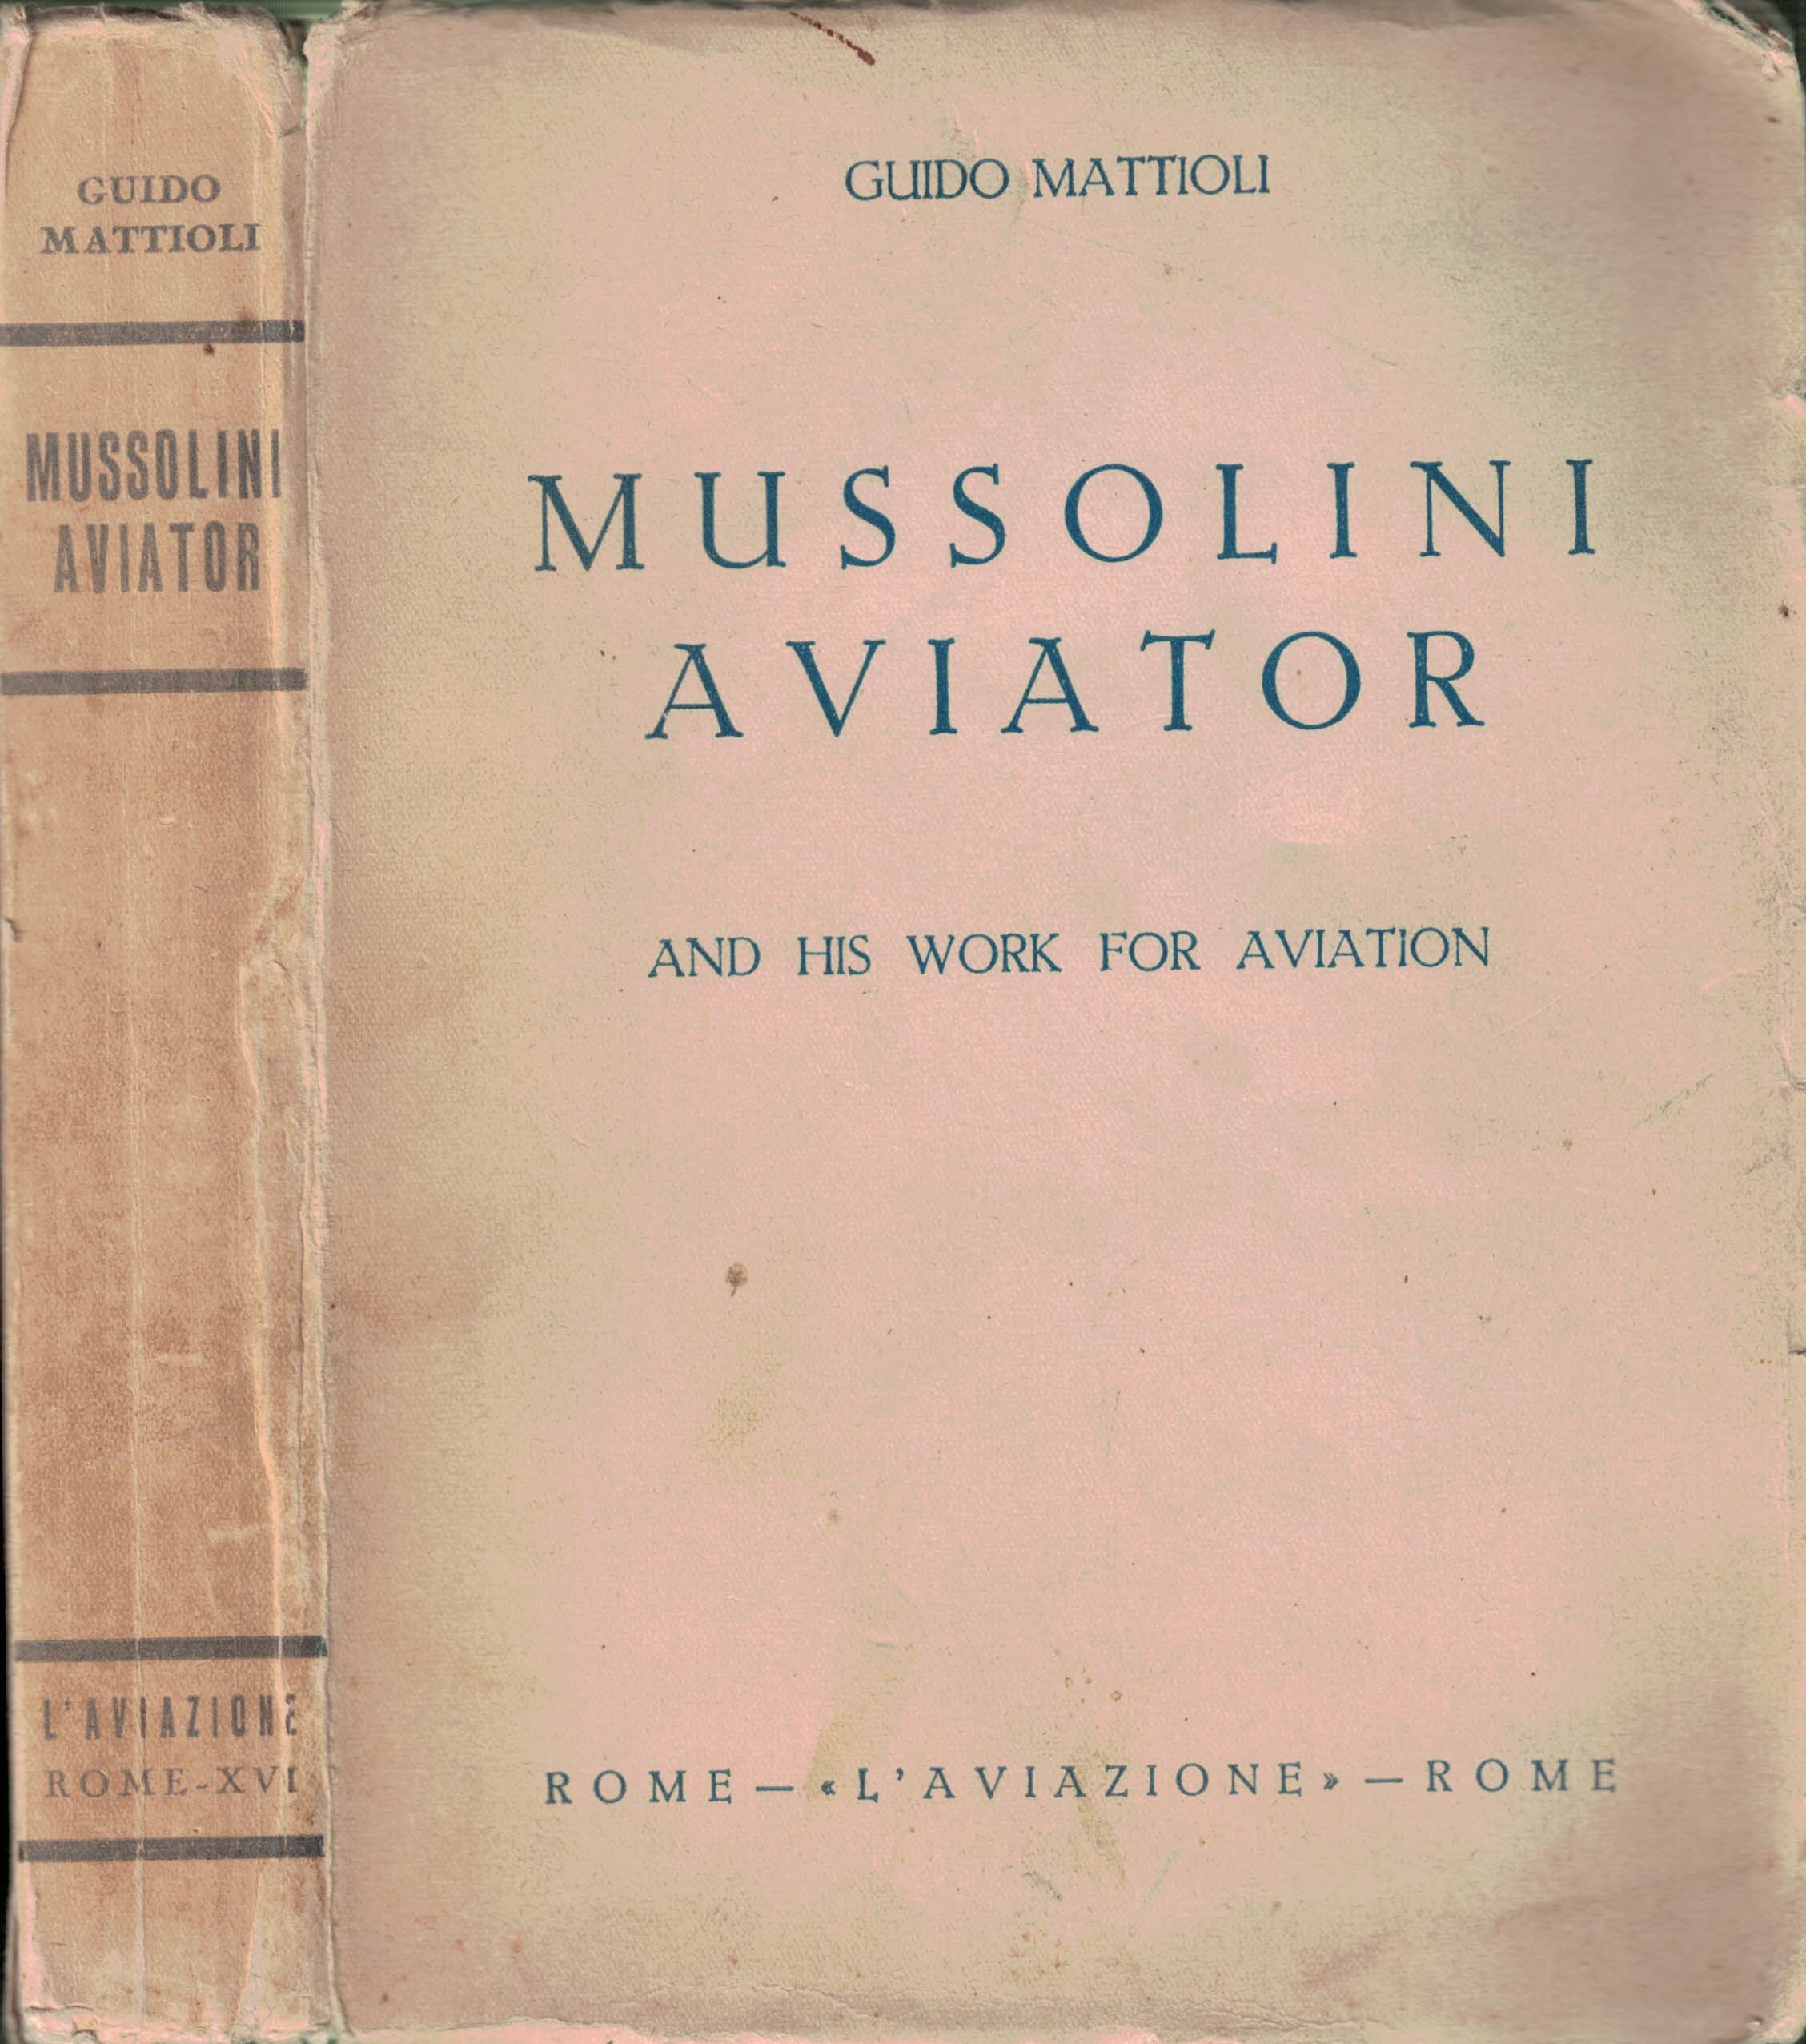 Mussolini Aviator and His Work for Aviation